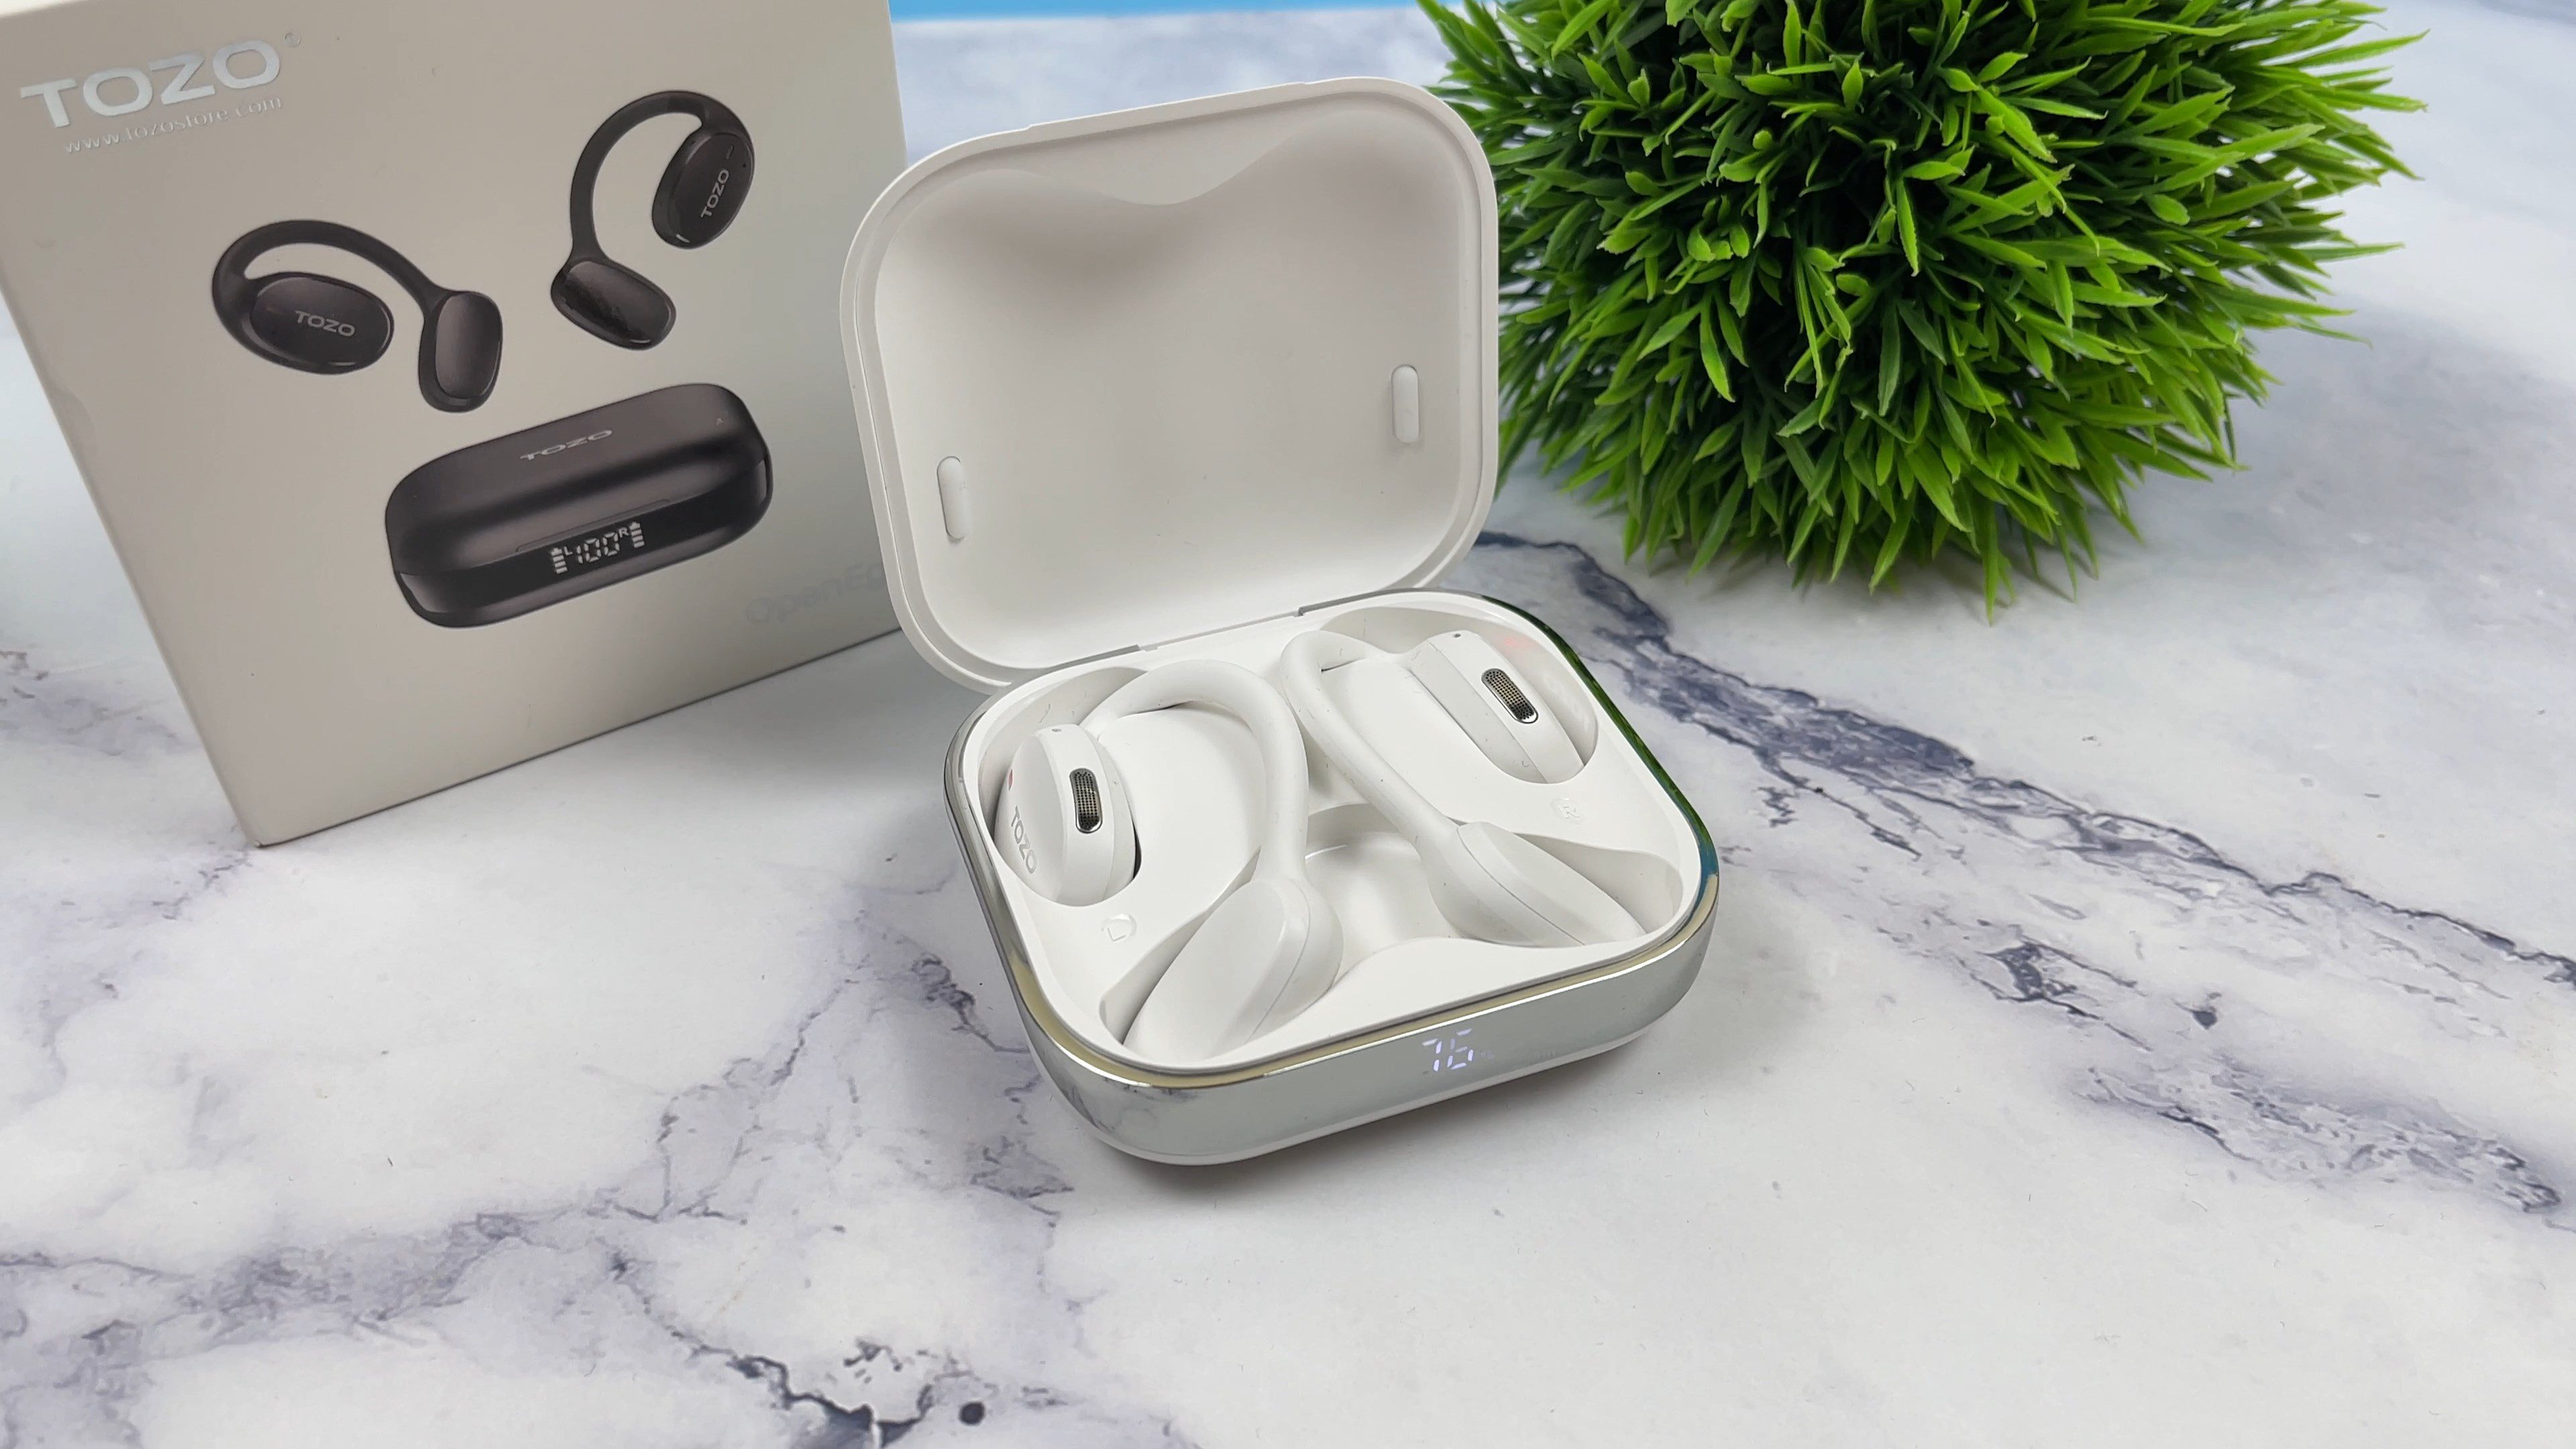 TOZO OpenEgo Review: High Quality Sound for a Low Price?